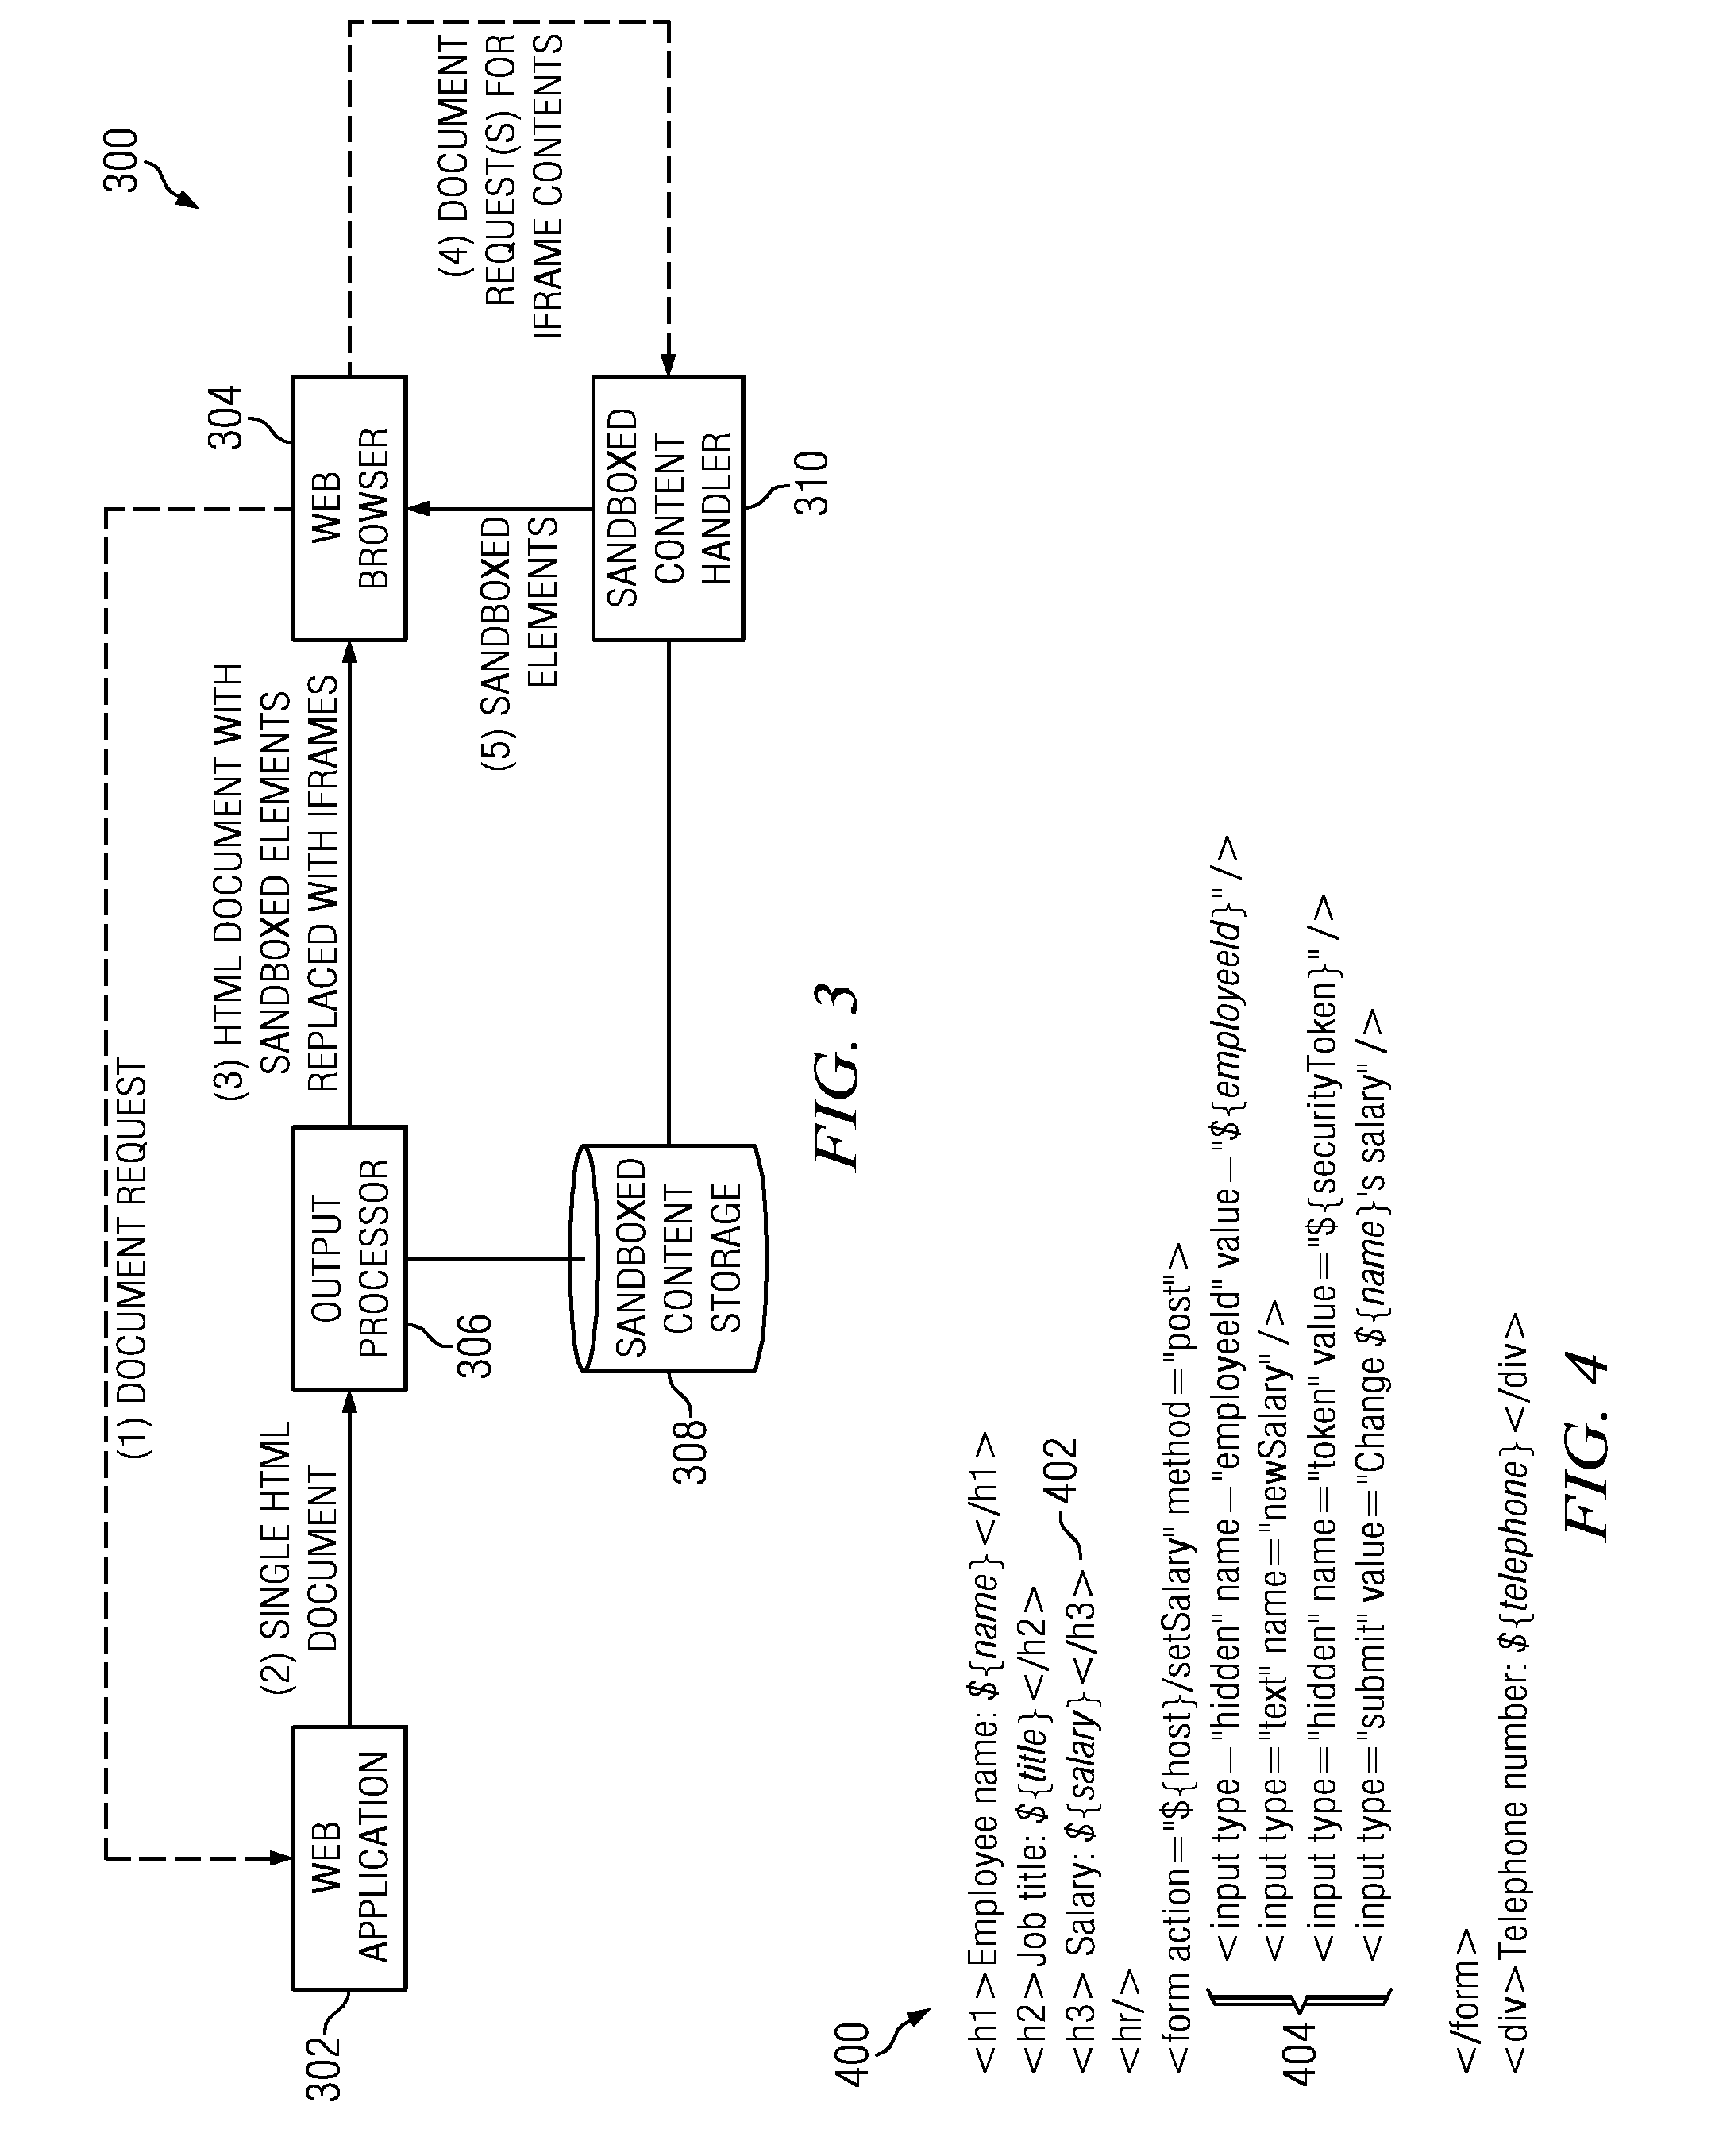 Method and apparatus for protecting markup language document against cross-site scripting attack